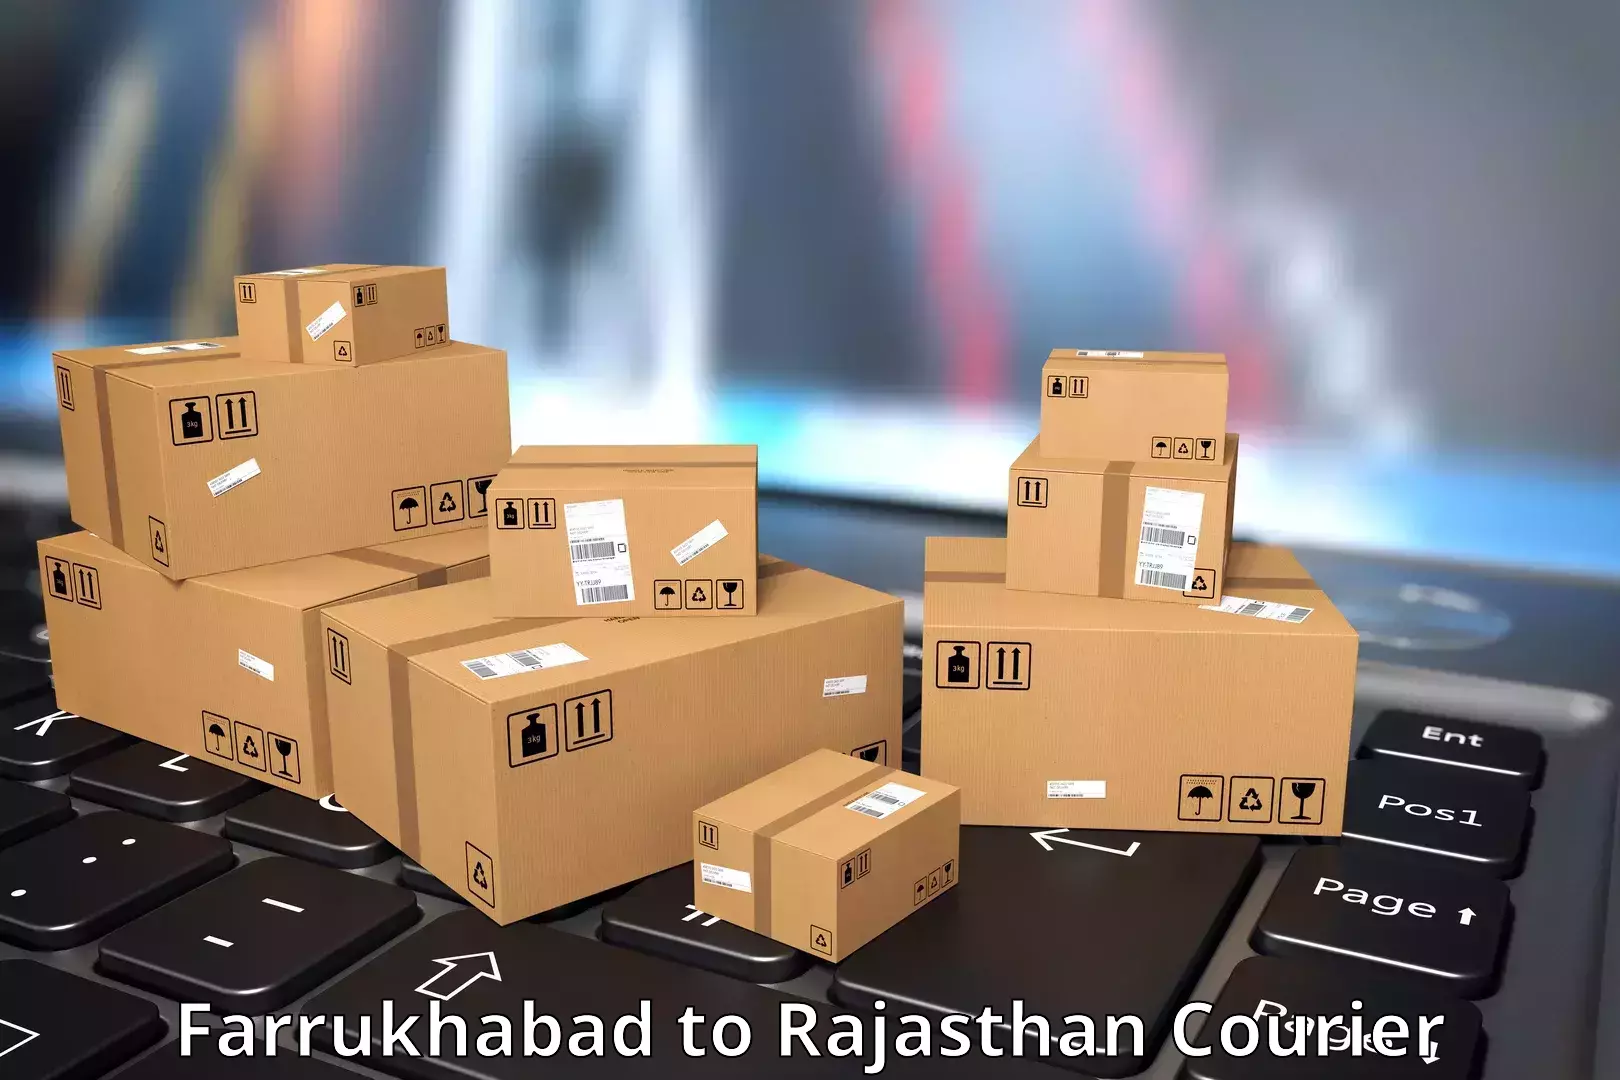 Subscription-based courier Farrukhabad to Gudha Gorji